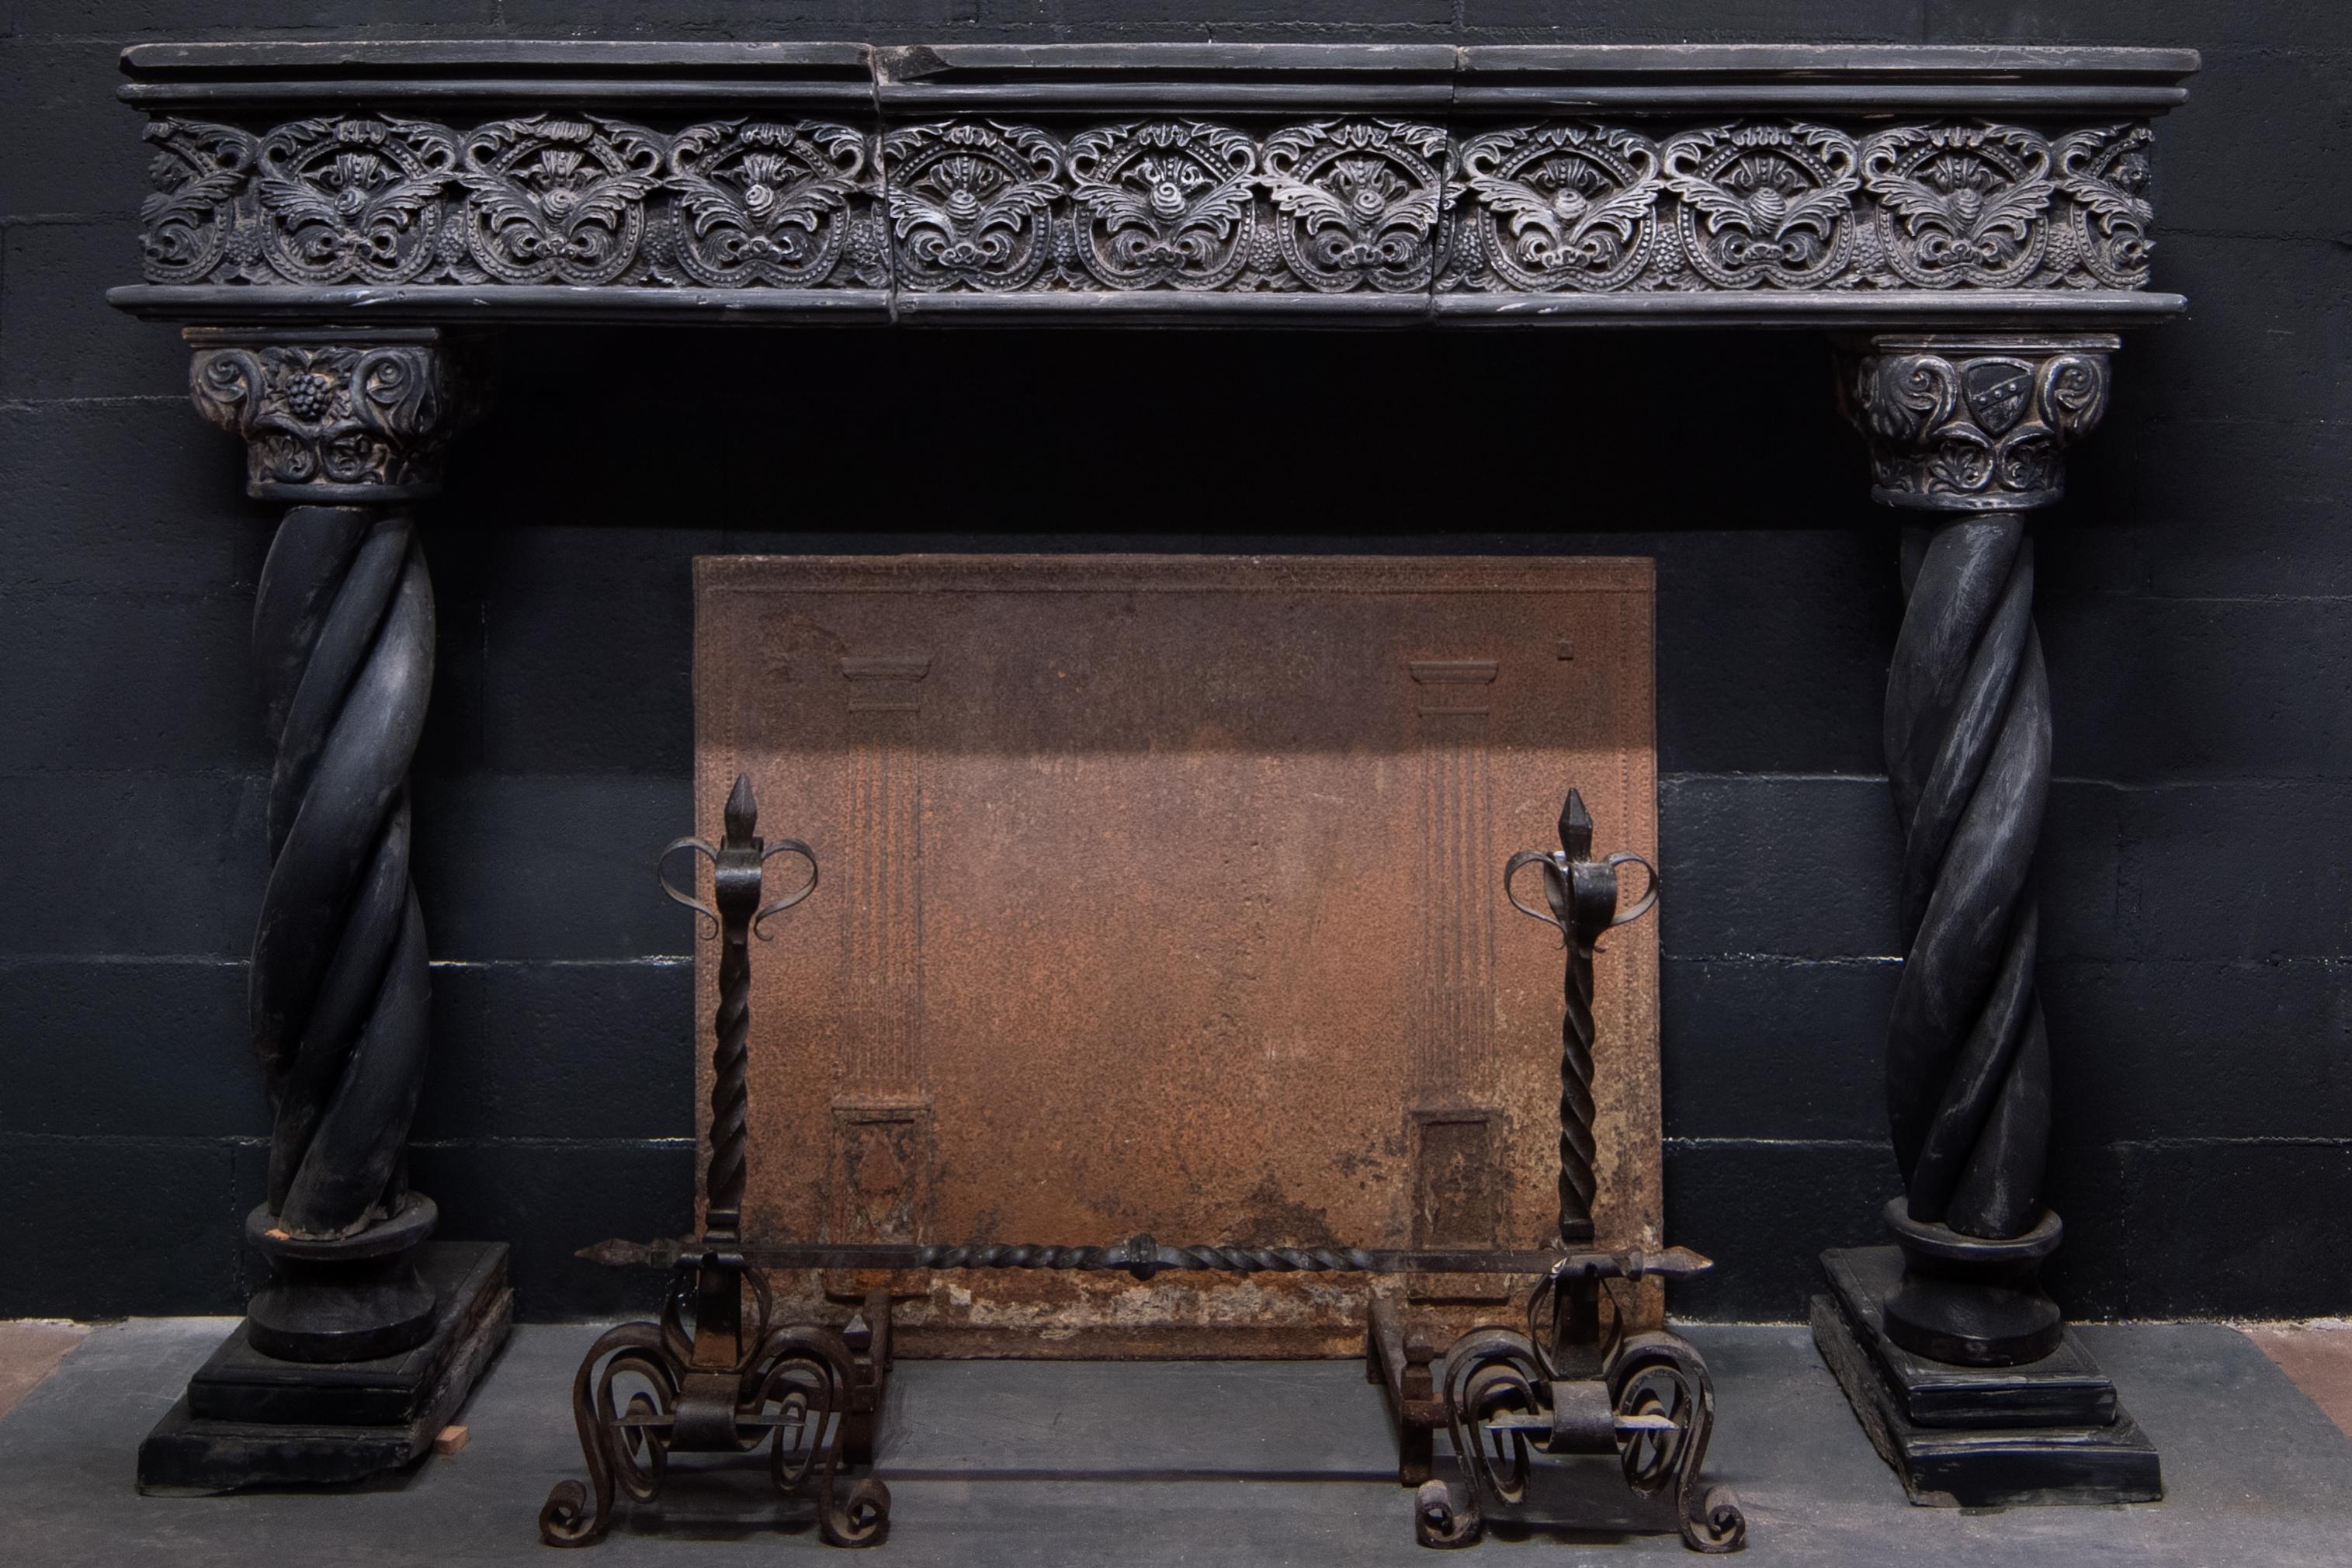 Antique fireplace in dark stone, slate, hand carved with rich frills, cornices and turned columns, hand-built by a 16th century artisan in northern Italy (Genoa), measuring cm: W 190 x H 134.5 x D max cm 47, the internal opening measures cm: W 132 x